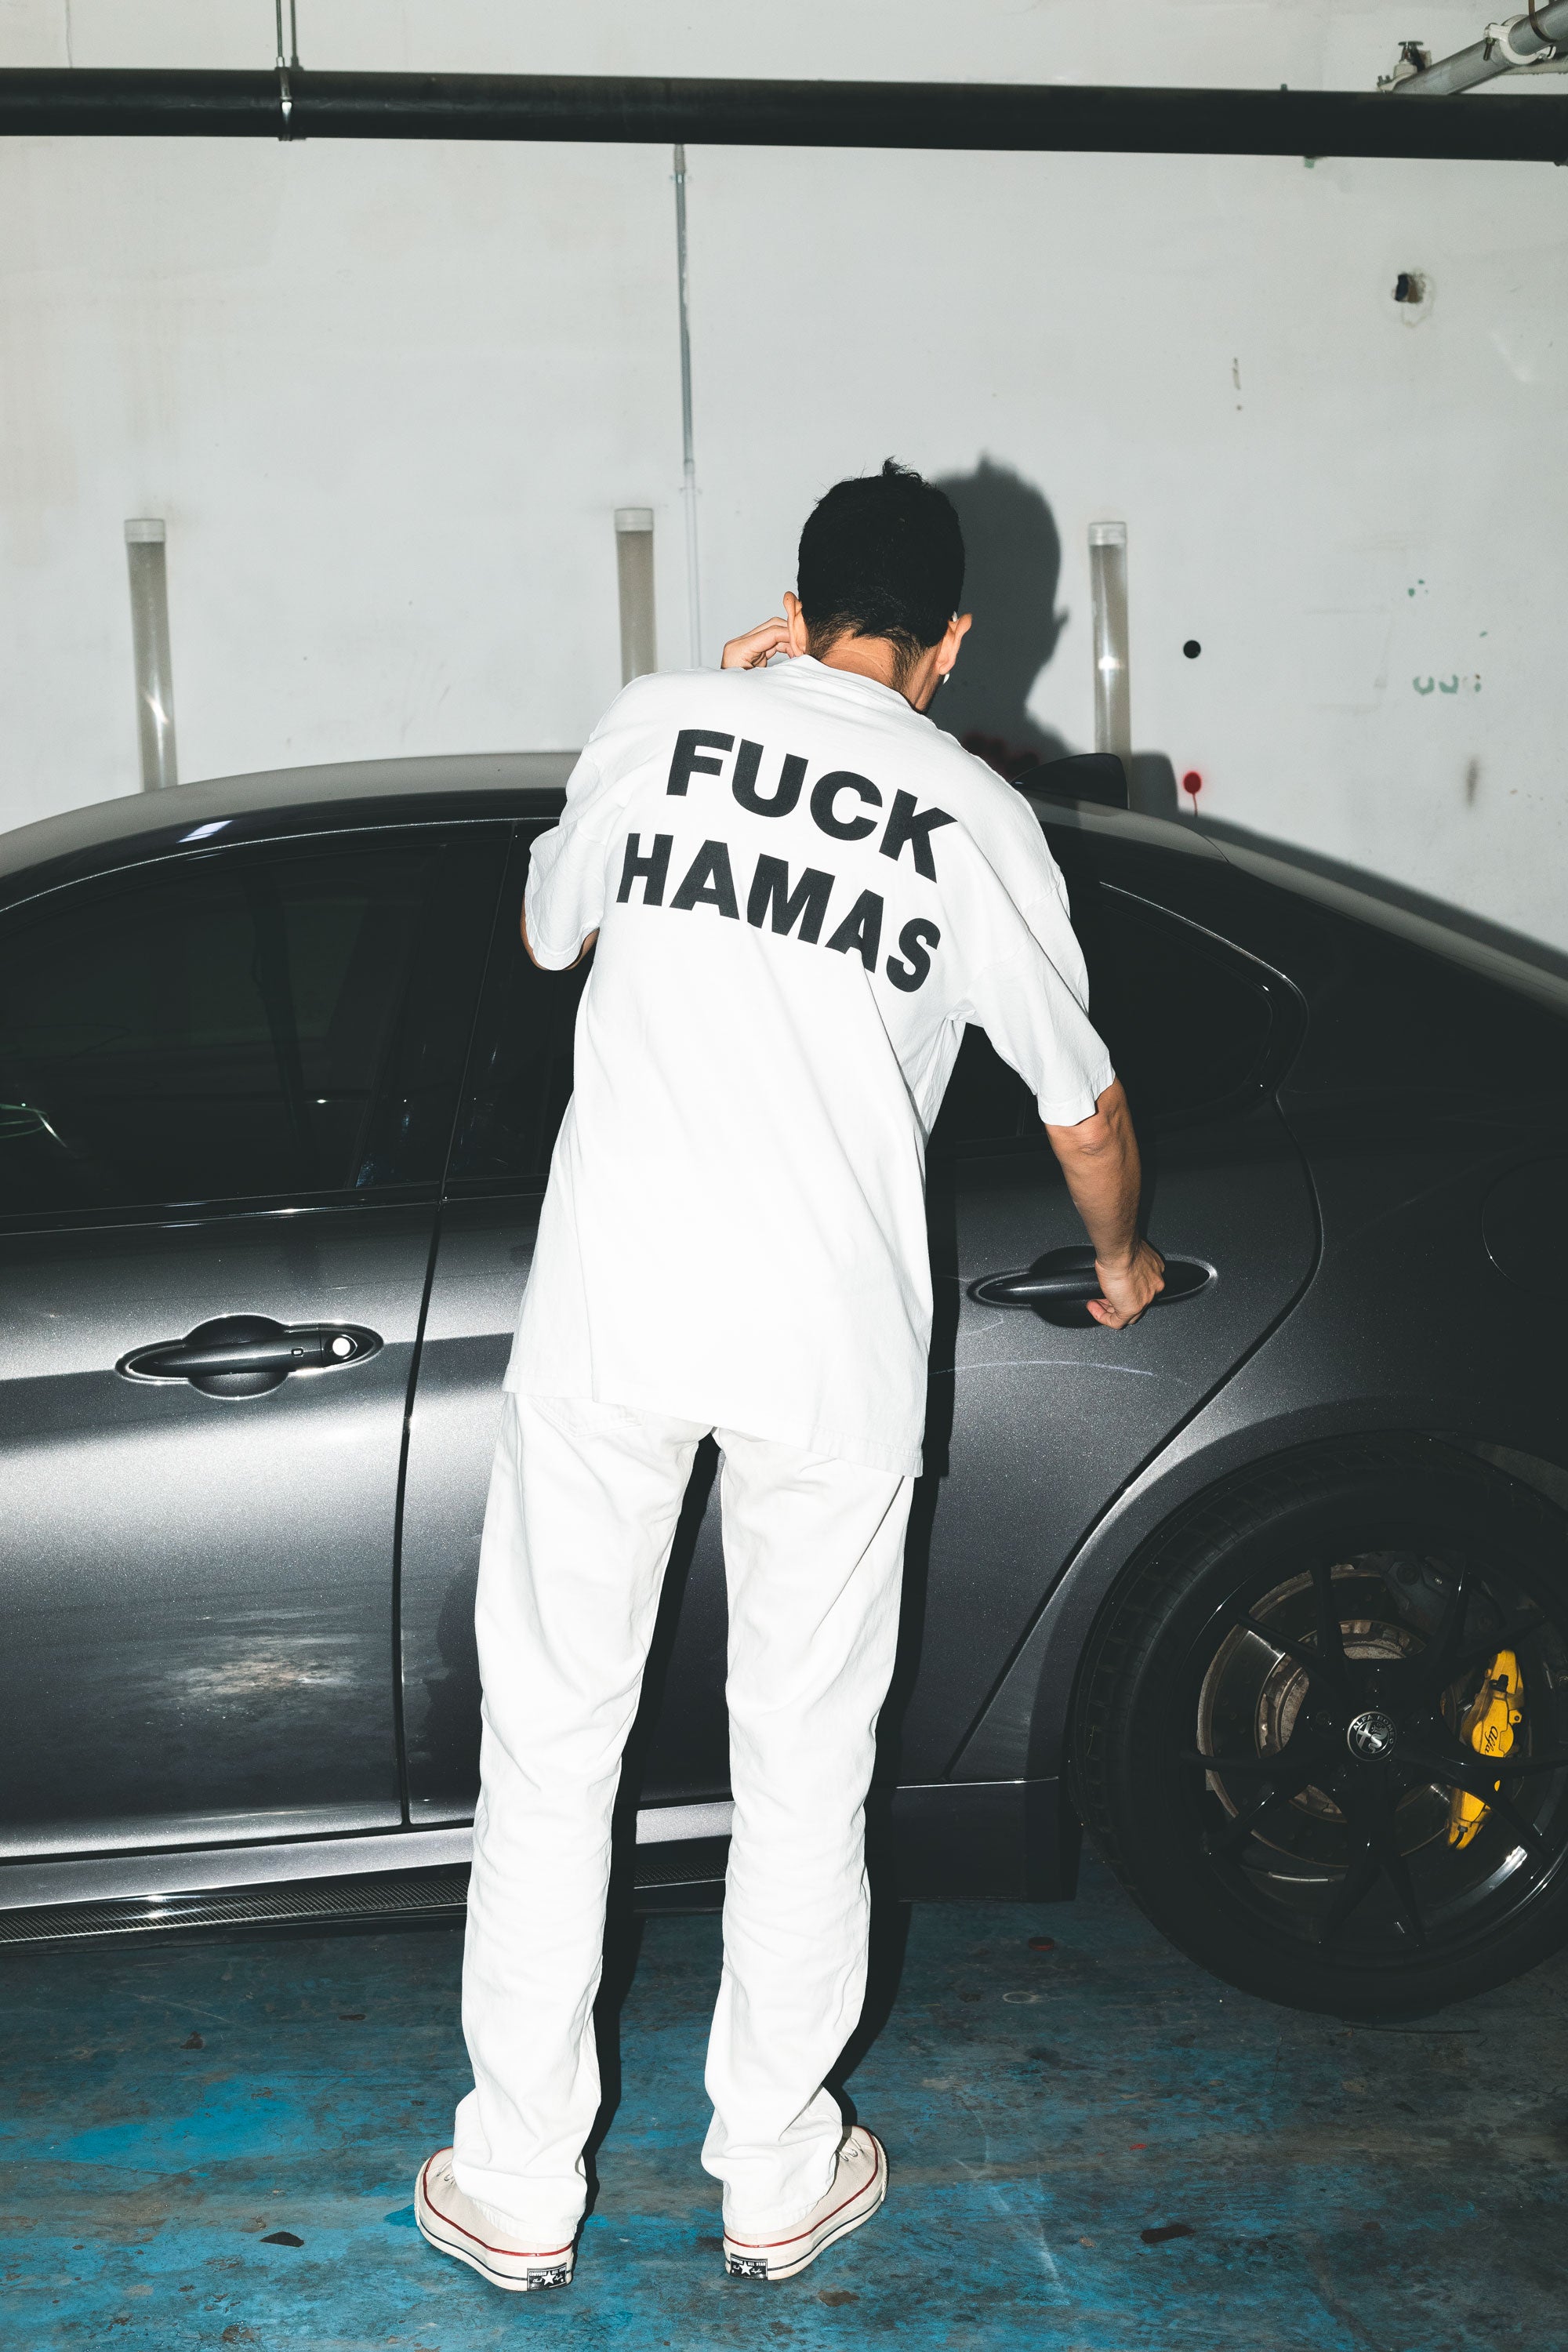 FUCK HAMAS T SHIRT BY DABUSH. DABUSH T-SHIRTS. 100% Cotton, oversized tee with Back and front print. Made in Tel aviv. Shop and view the latest Drops from the official DABUSH website. Worldwide Shipping. DABUSH is a publishing house, design studio and a brand based in Tel Aviv, Israel.